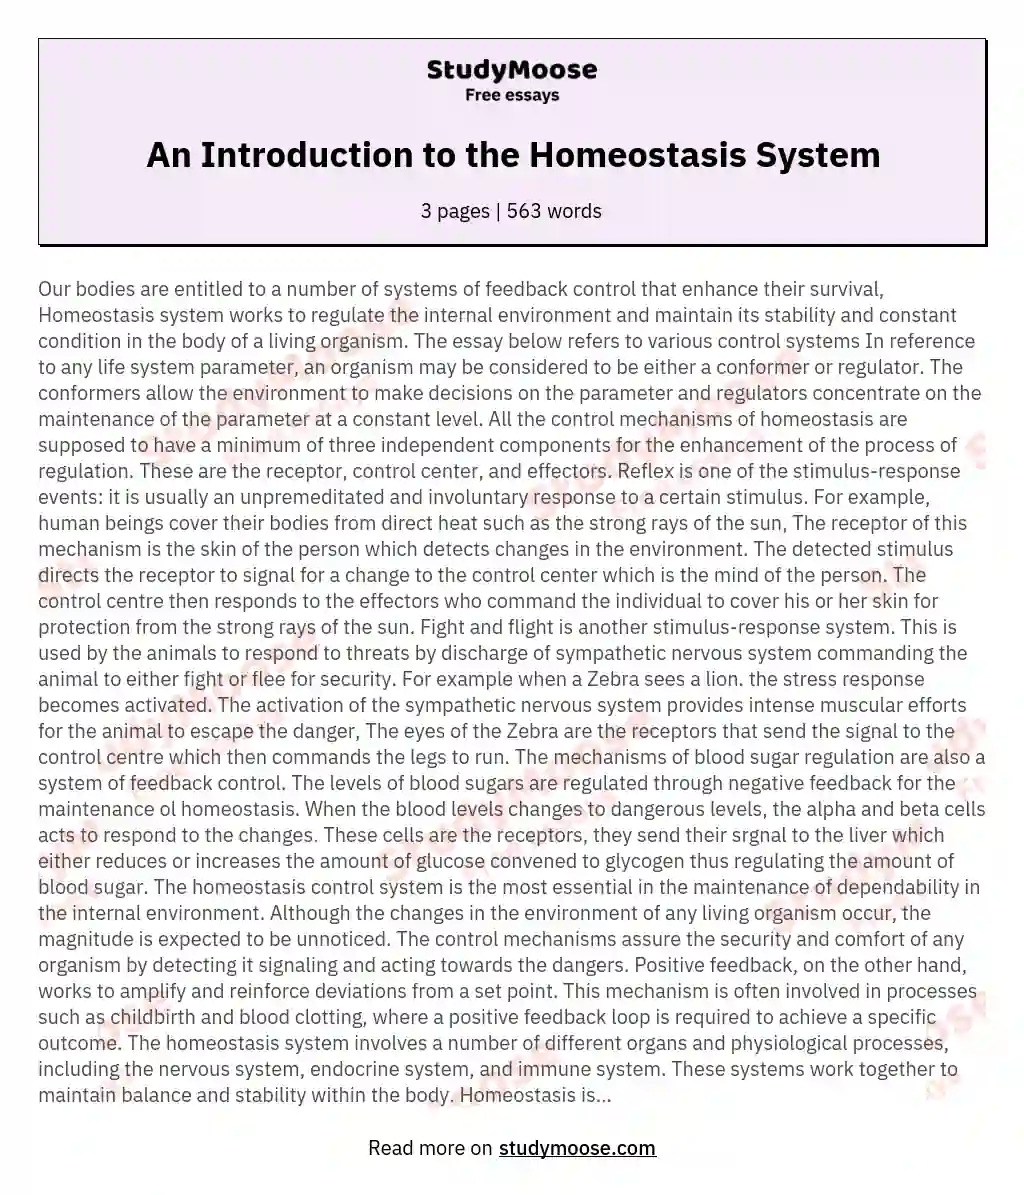 An Introduction to the Homeostasis System essay